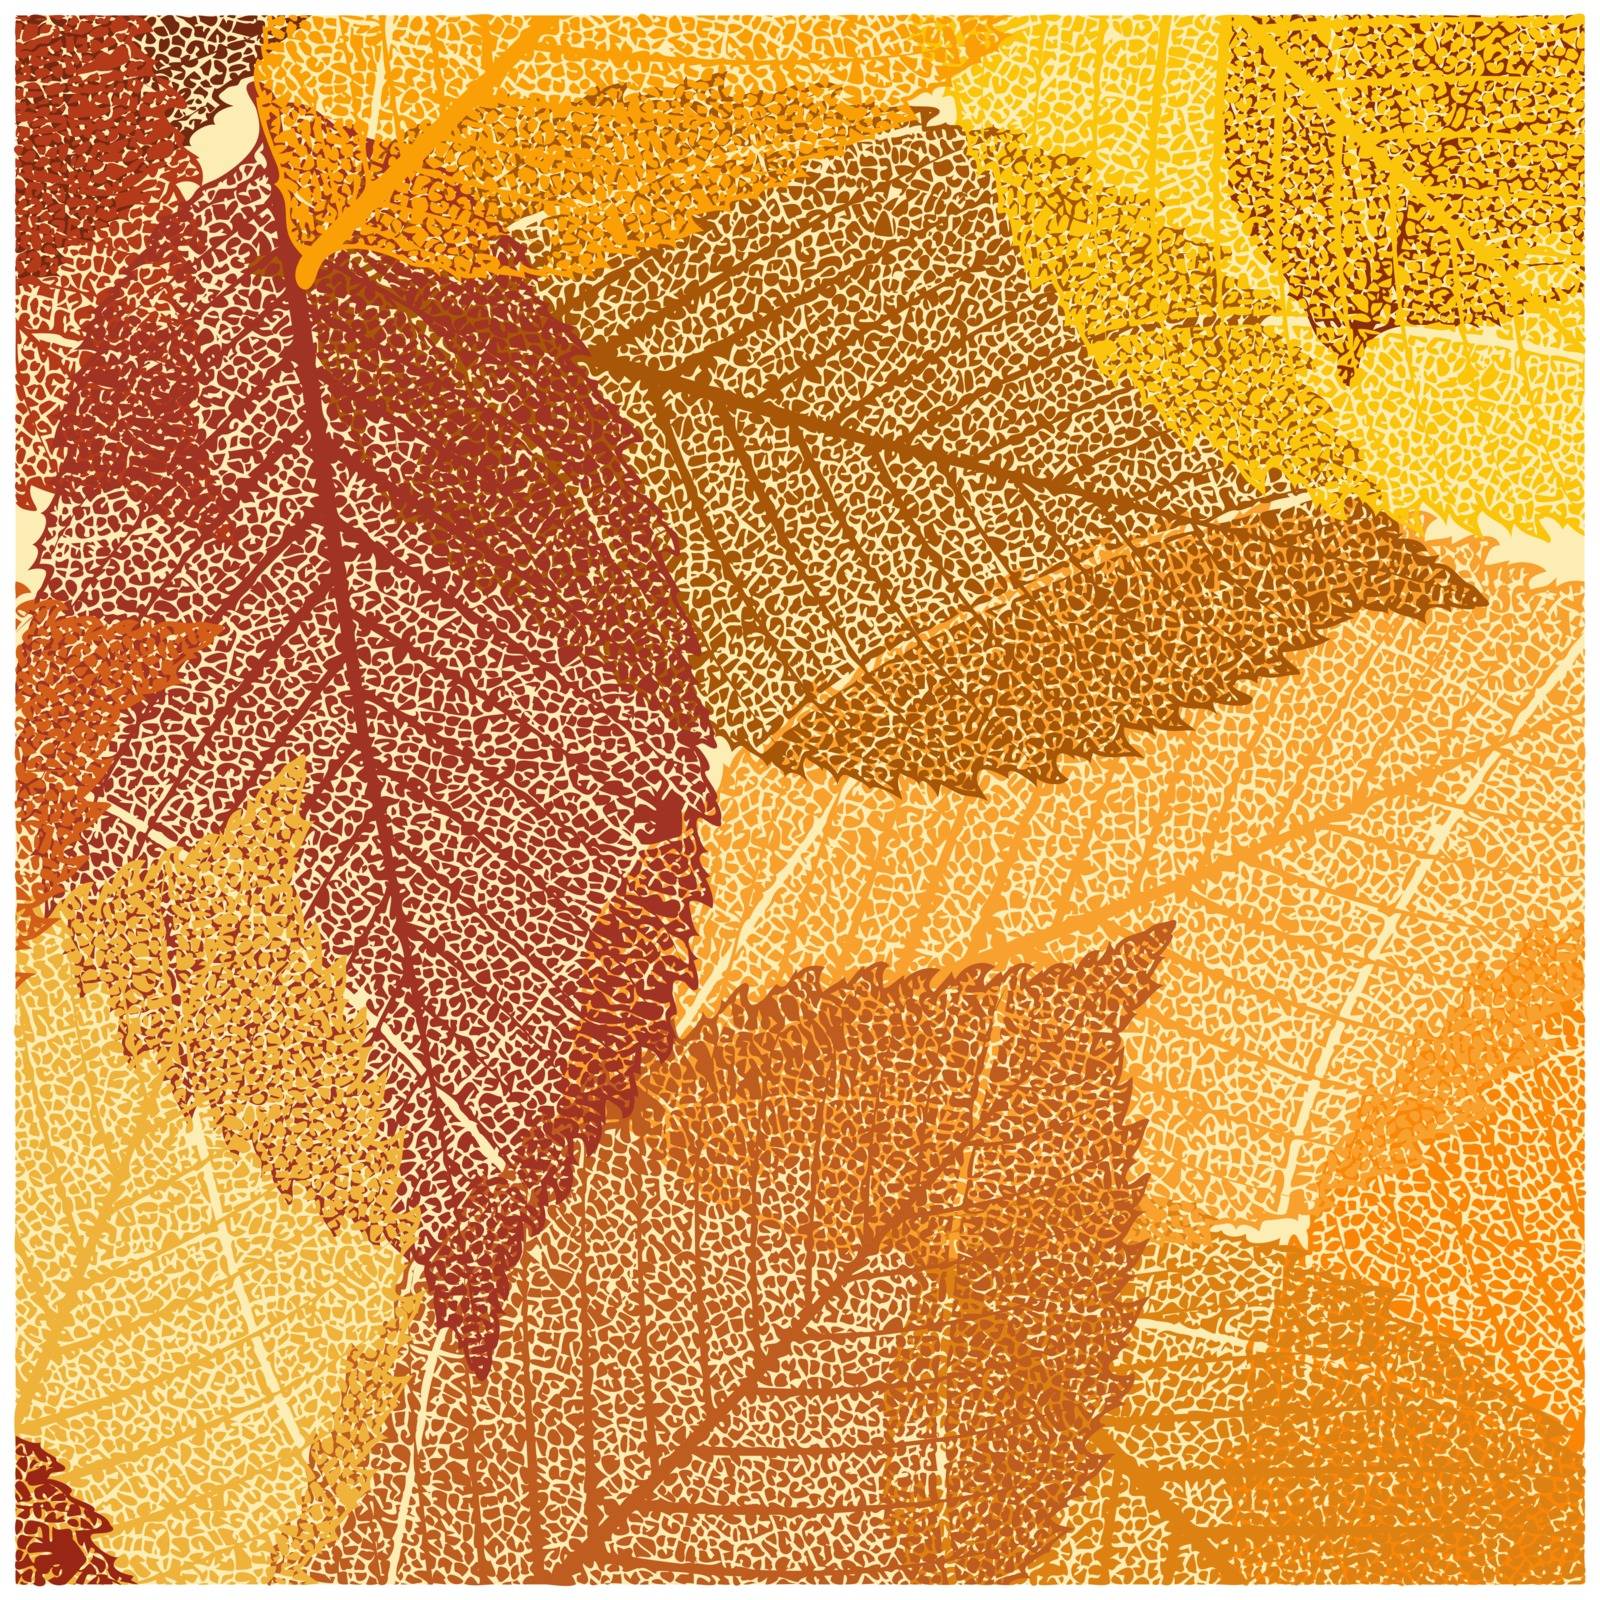 Dry autumn leaves template. EPS 8 by Petrov_Vladimir